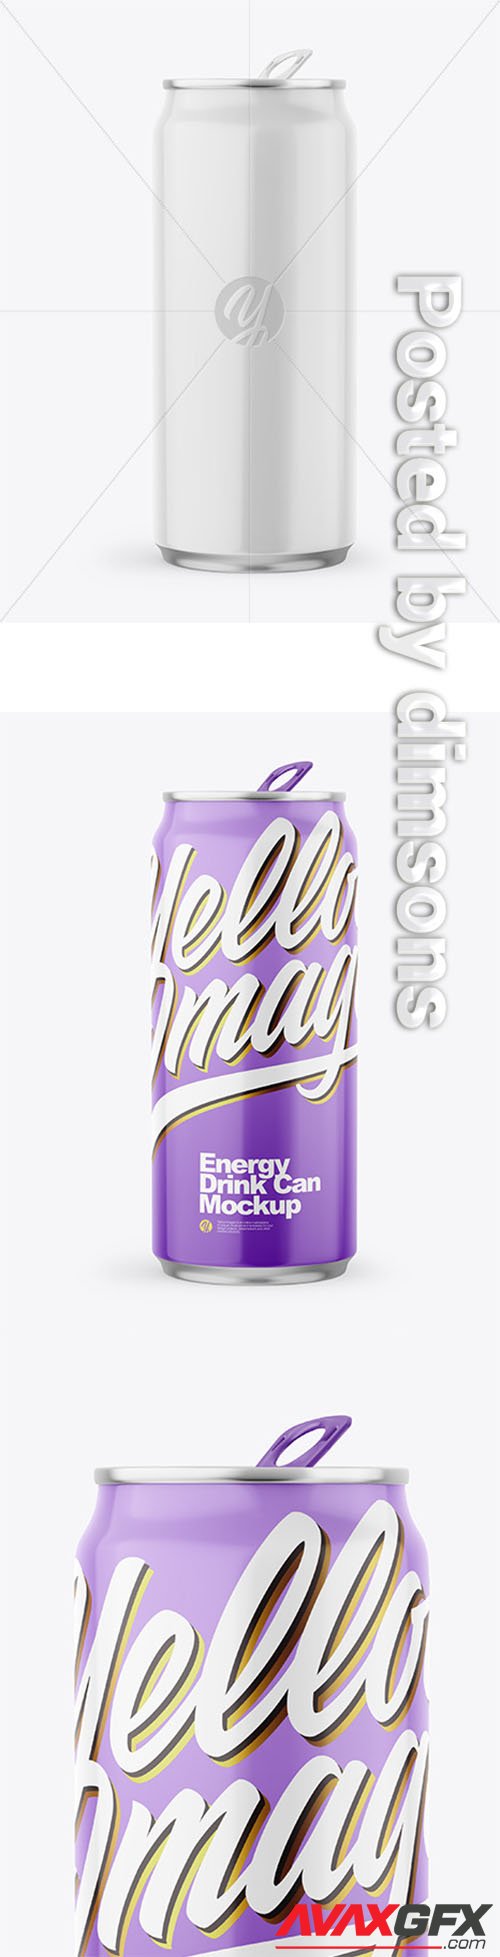 Metallic Drink Can With Glossy Finish Mockup 66556